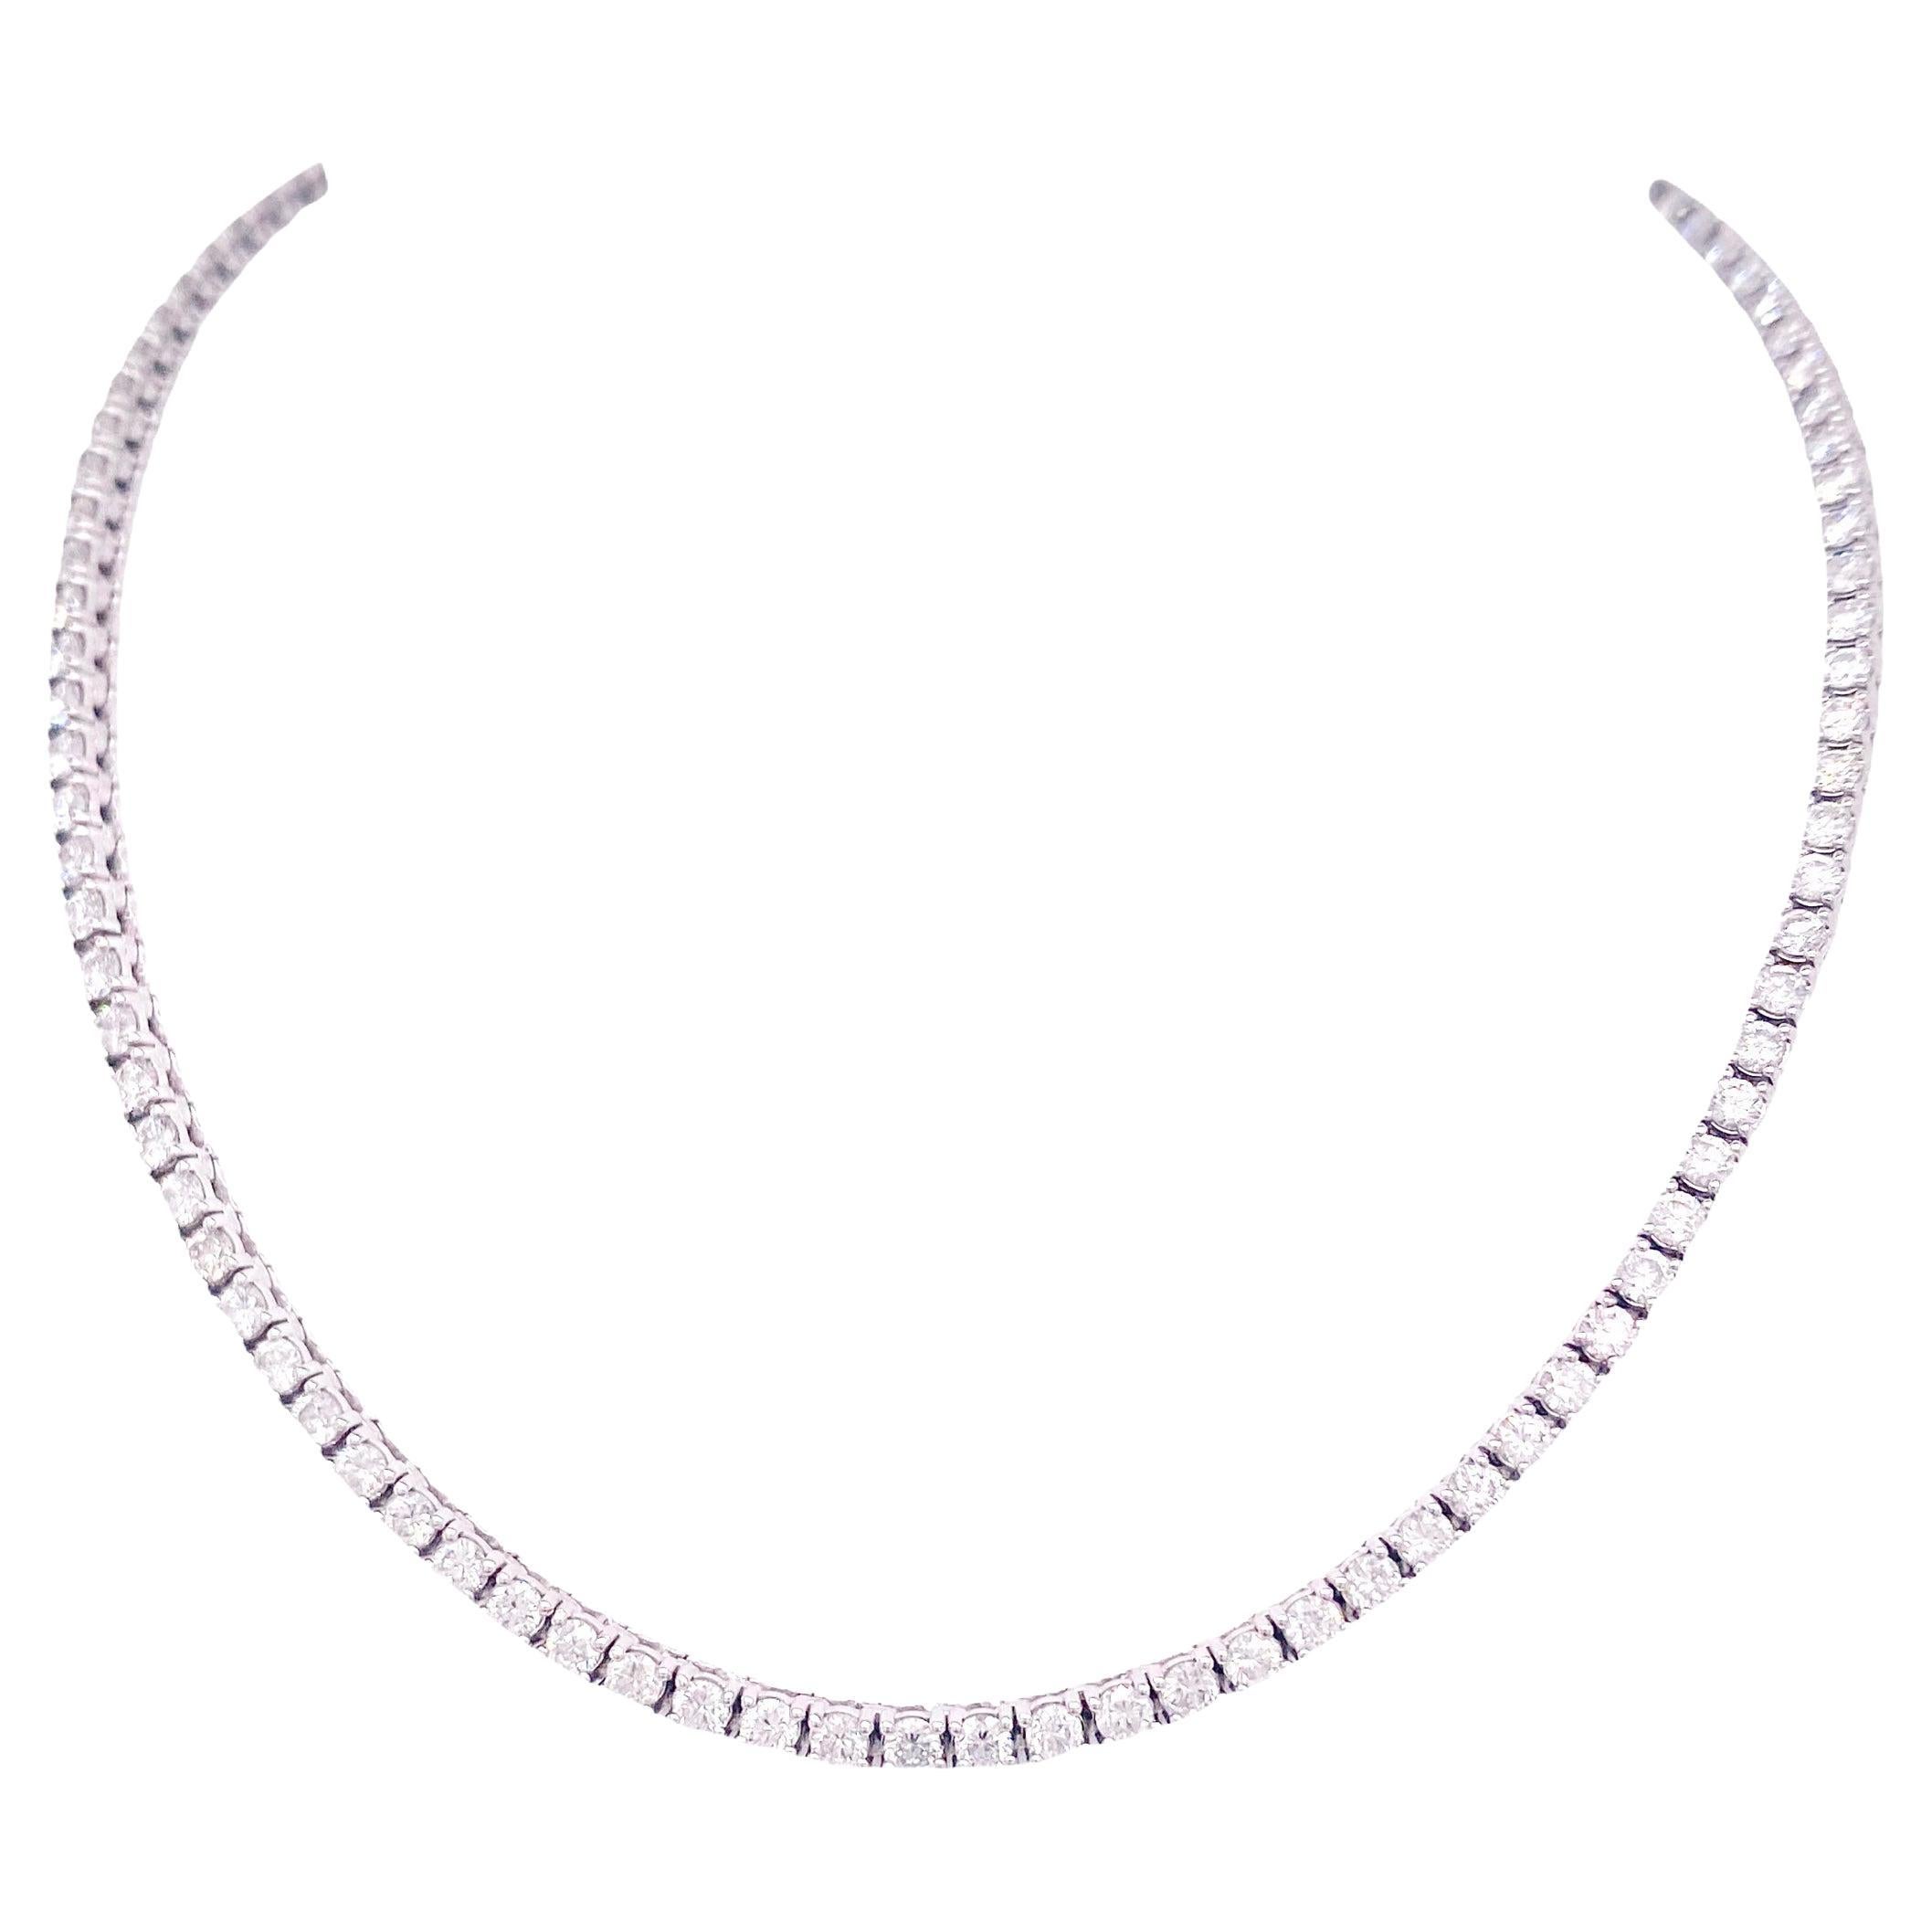 Eternity Riviera Necklace 5.50 Carat Diamond Tennis Necklace, White or Yellow For Sale